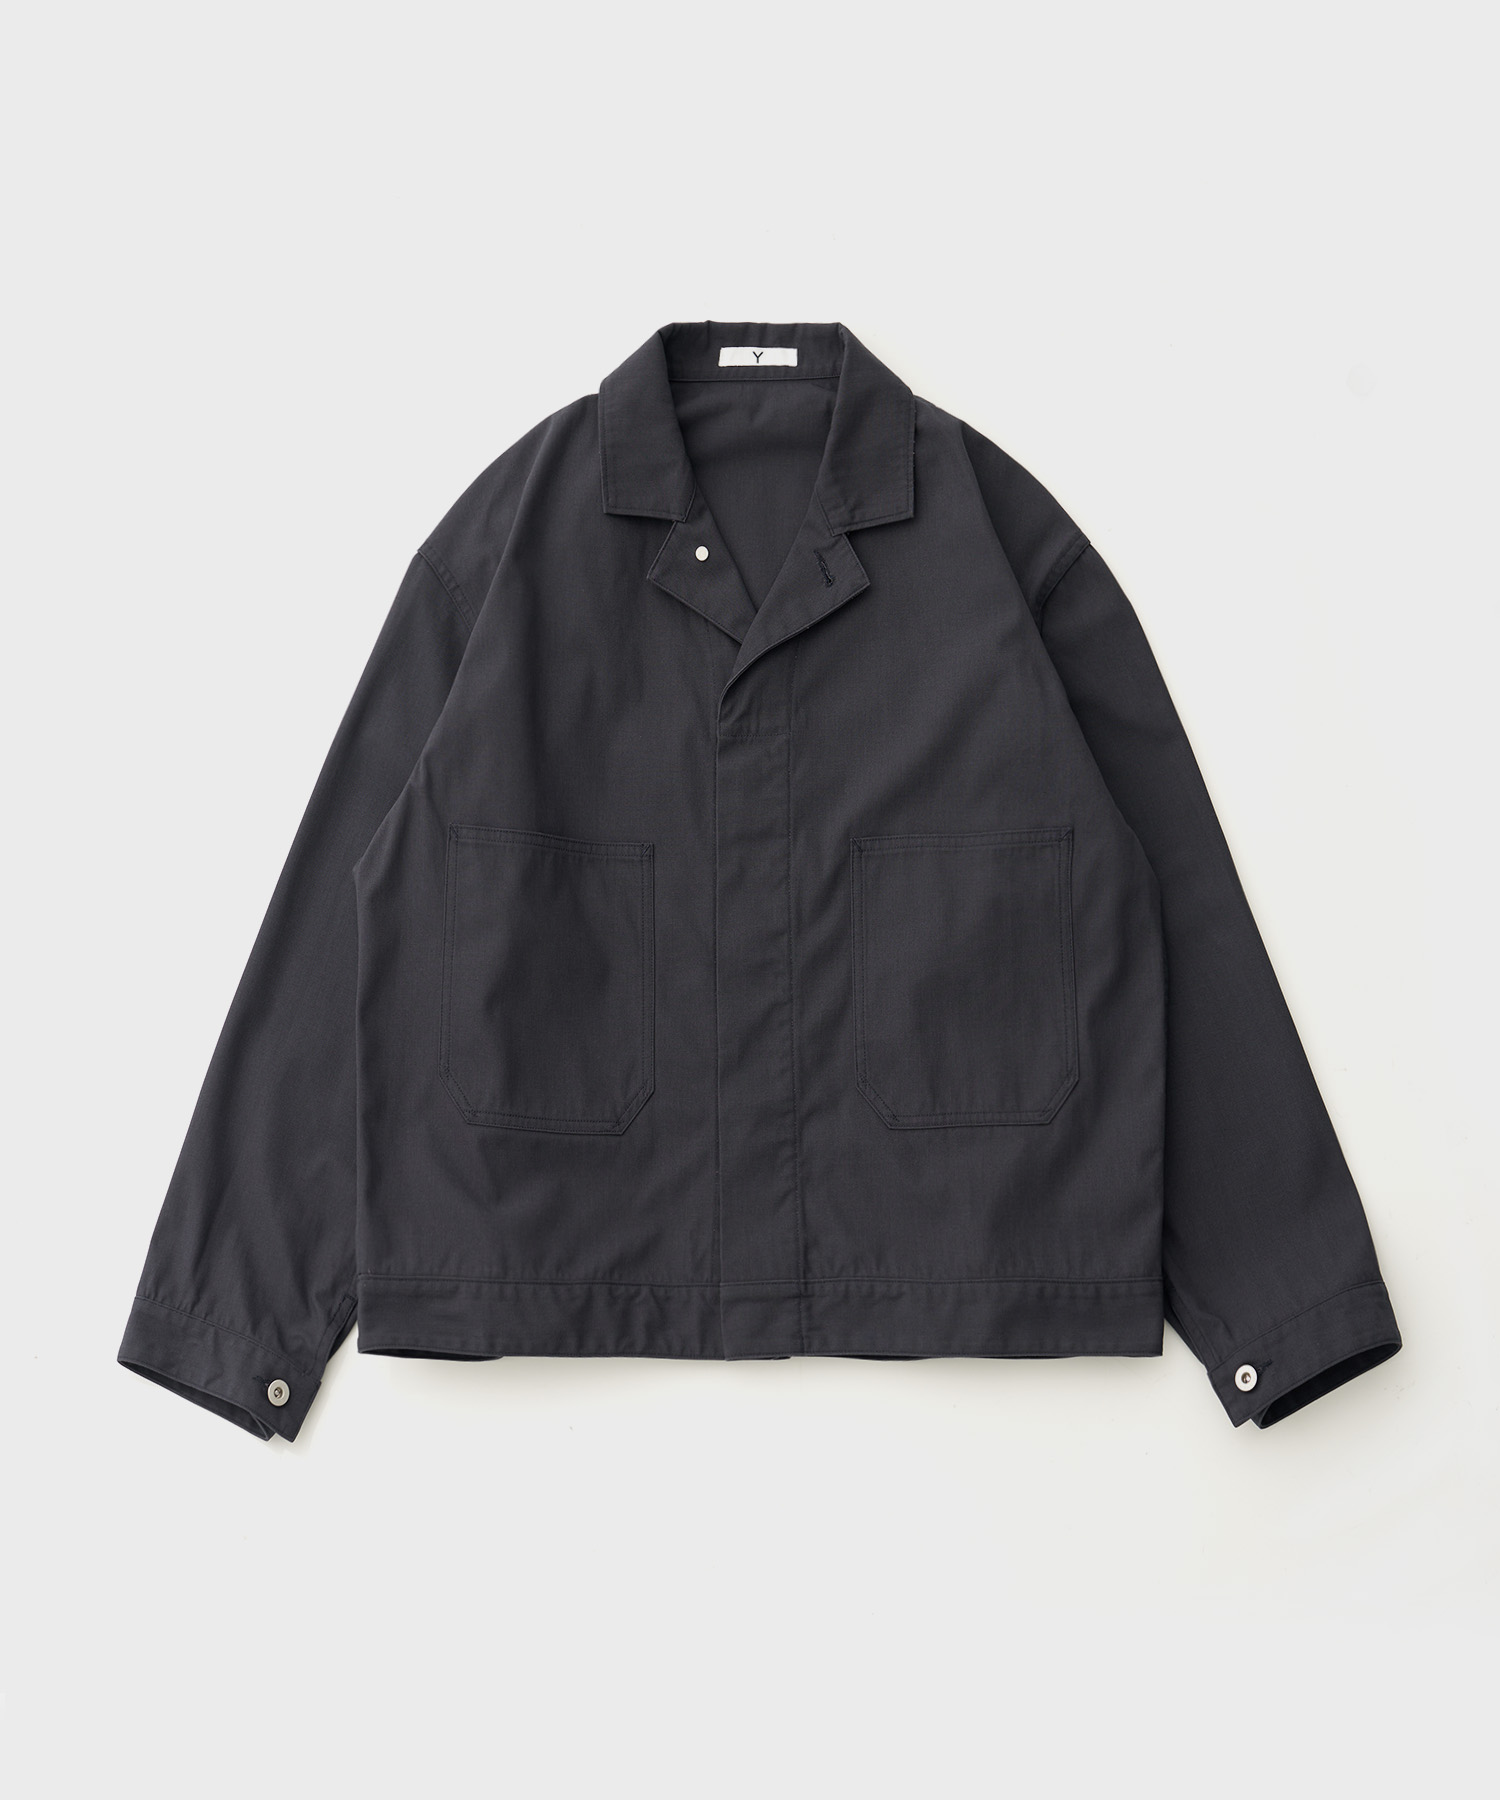 Org Cotton / Recycle Polyester Twill Blouson (Navy)